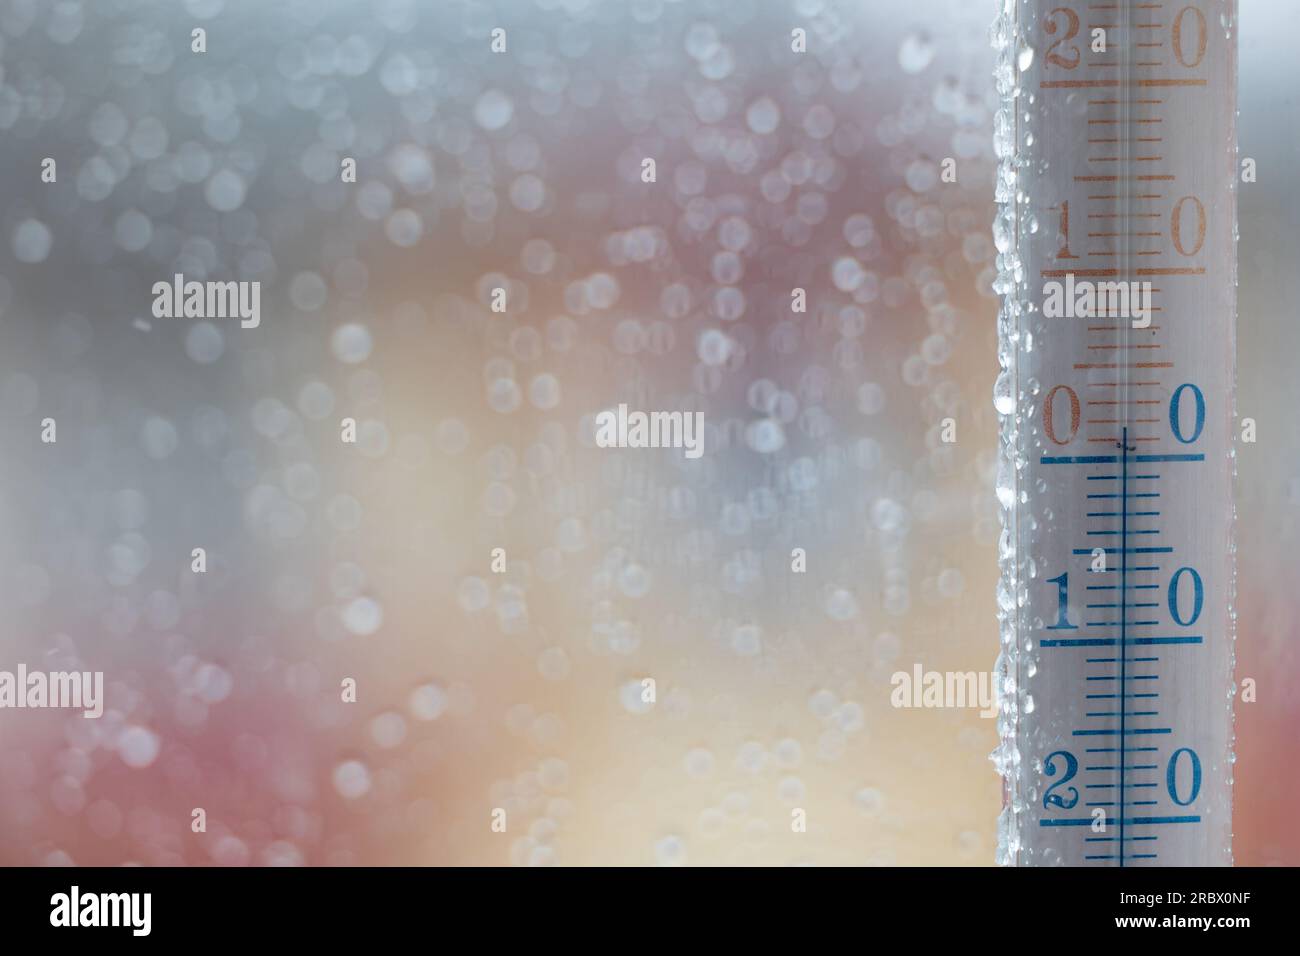 https://c8.alamy.com/comp/2RBX0NF/a-window-thermometer-showing-the-outside-temperature-raindrops-on-the-glass-blurred-background-outside-the-window-2RBX0NF.jpg